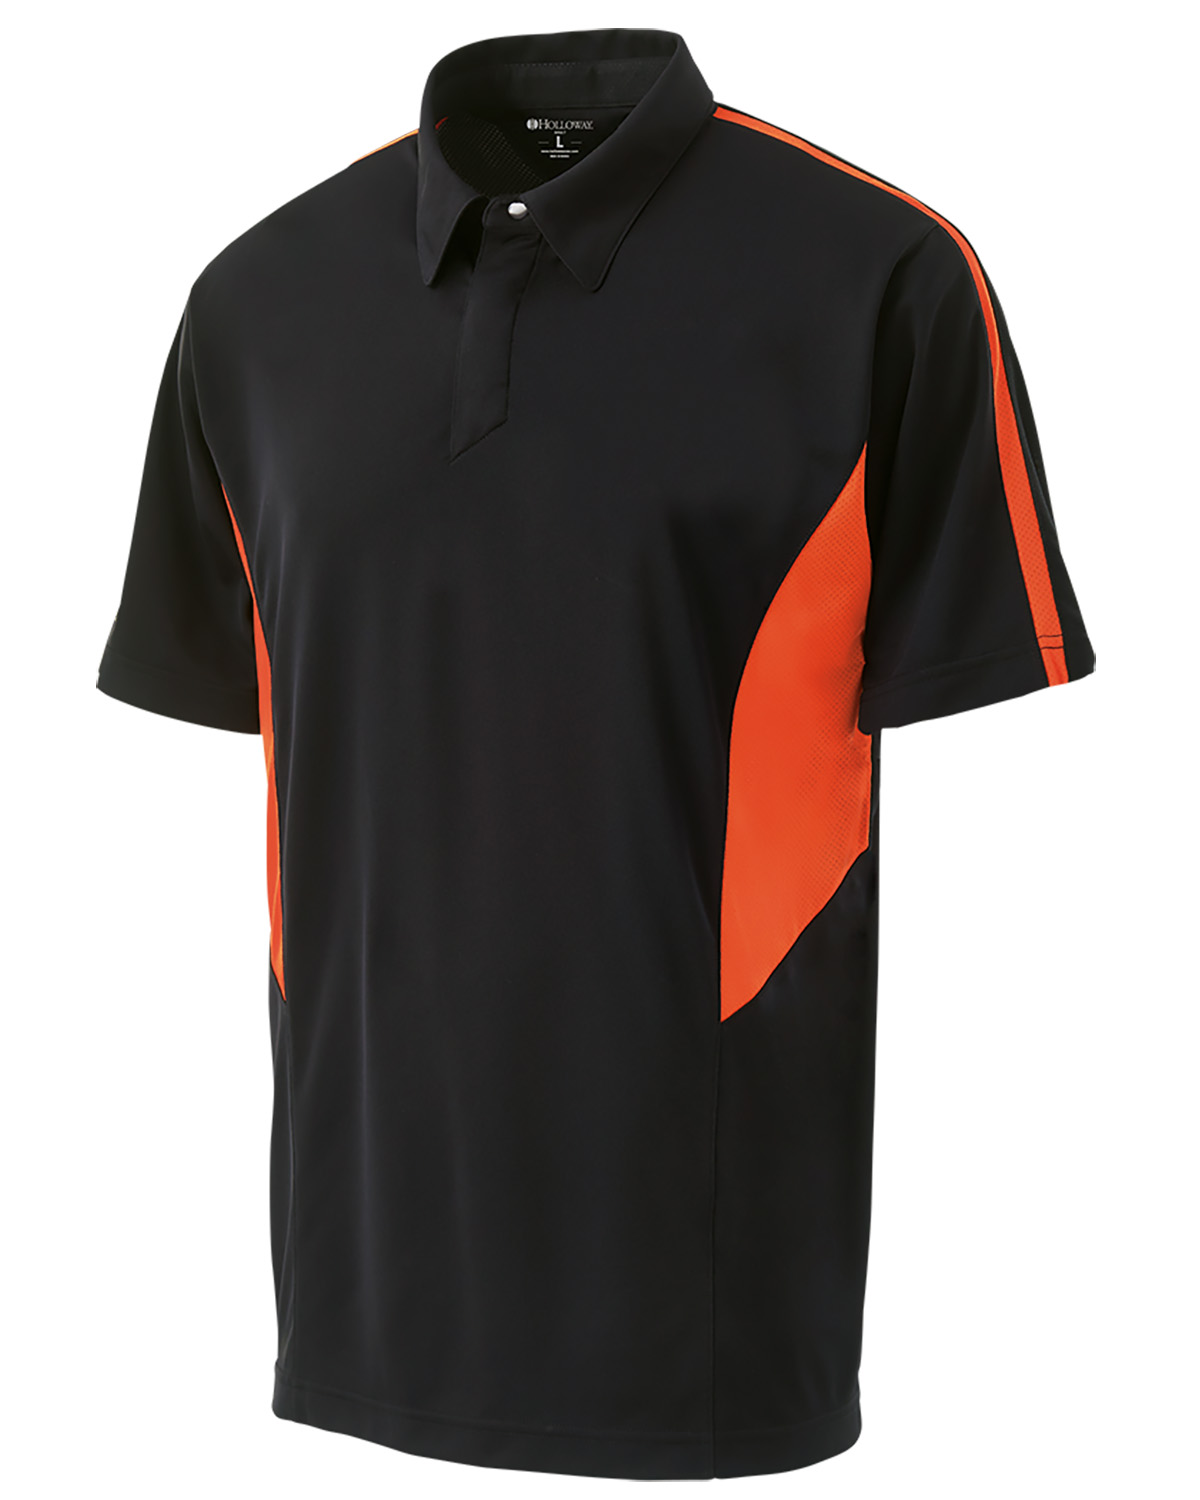 Holloway 222408 - Adult Polyester Snag Resistant Shark Bite Polo